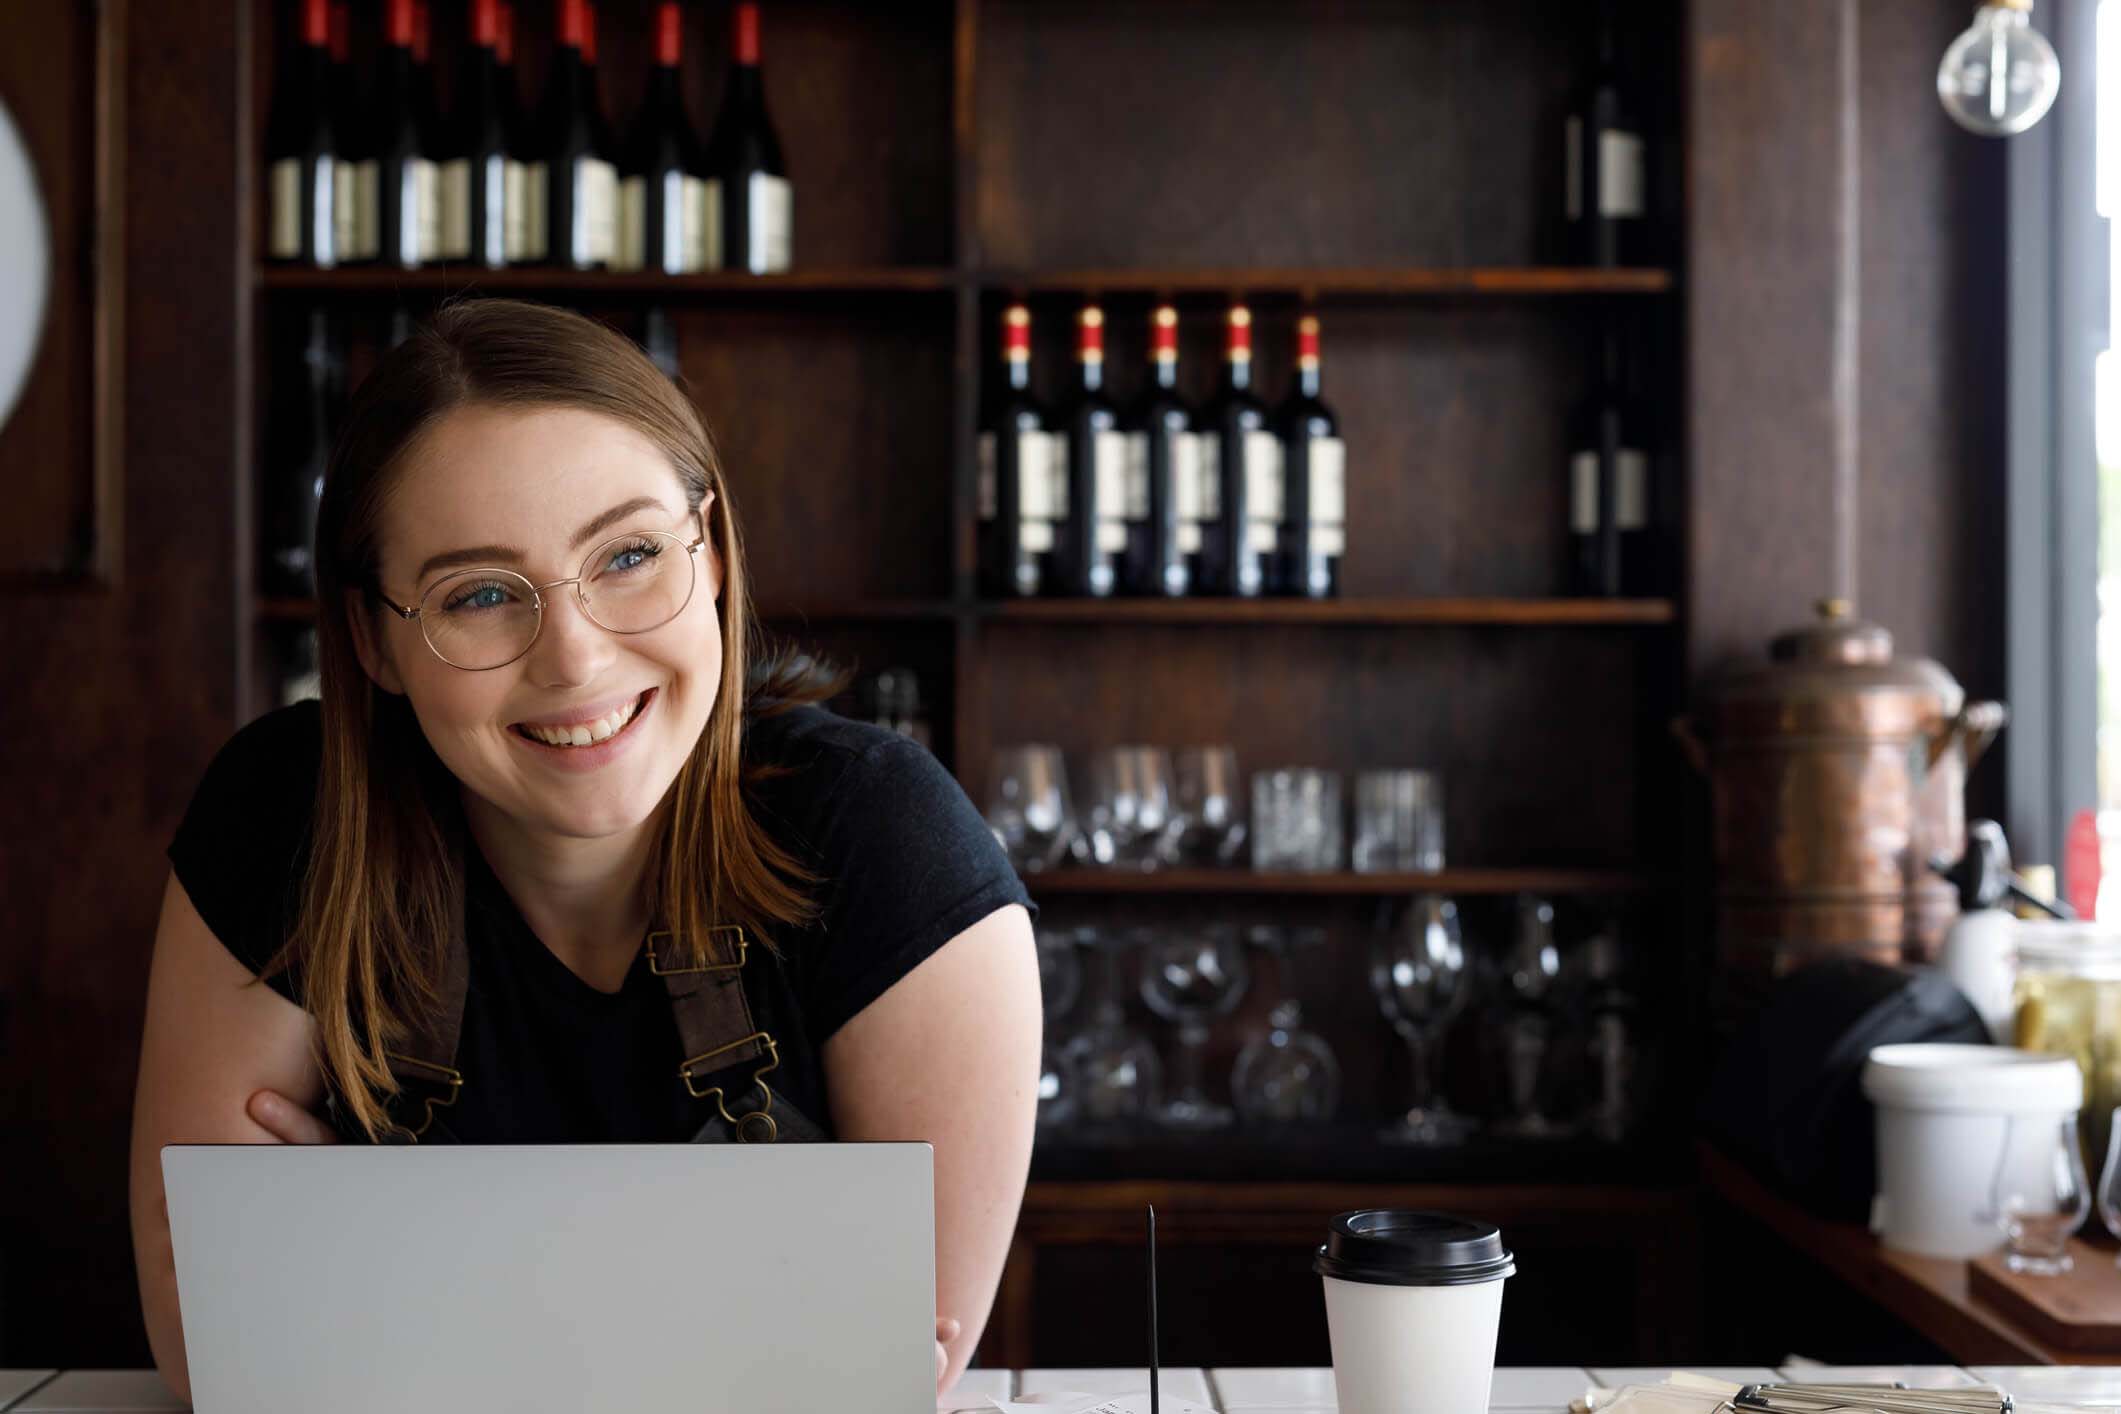 A young woman with a laptop in front of a selection of wines in a hospitality venue.